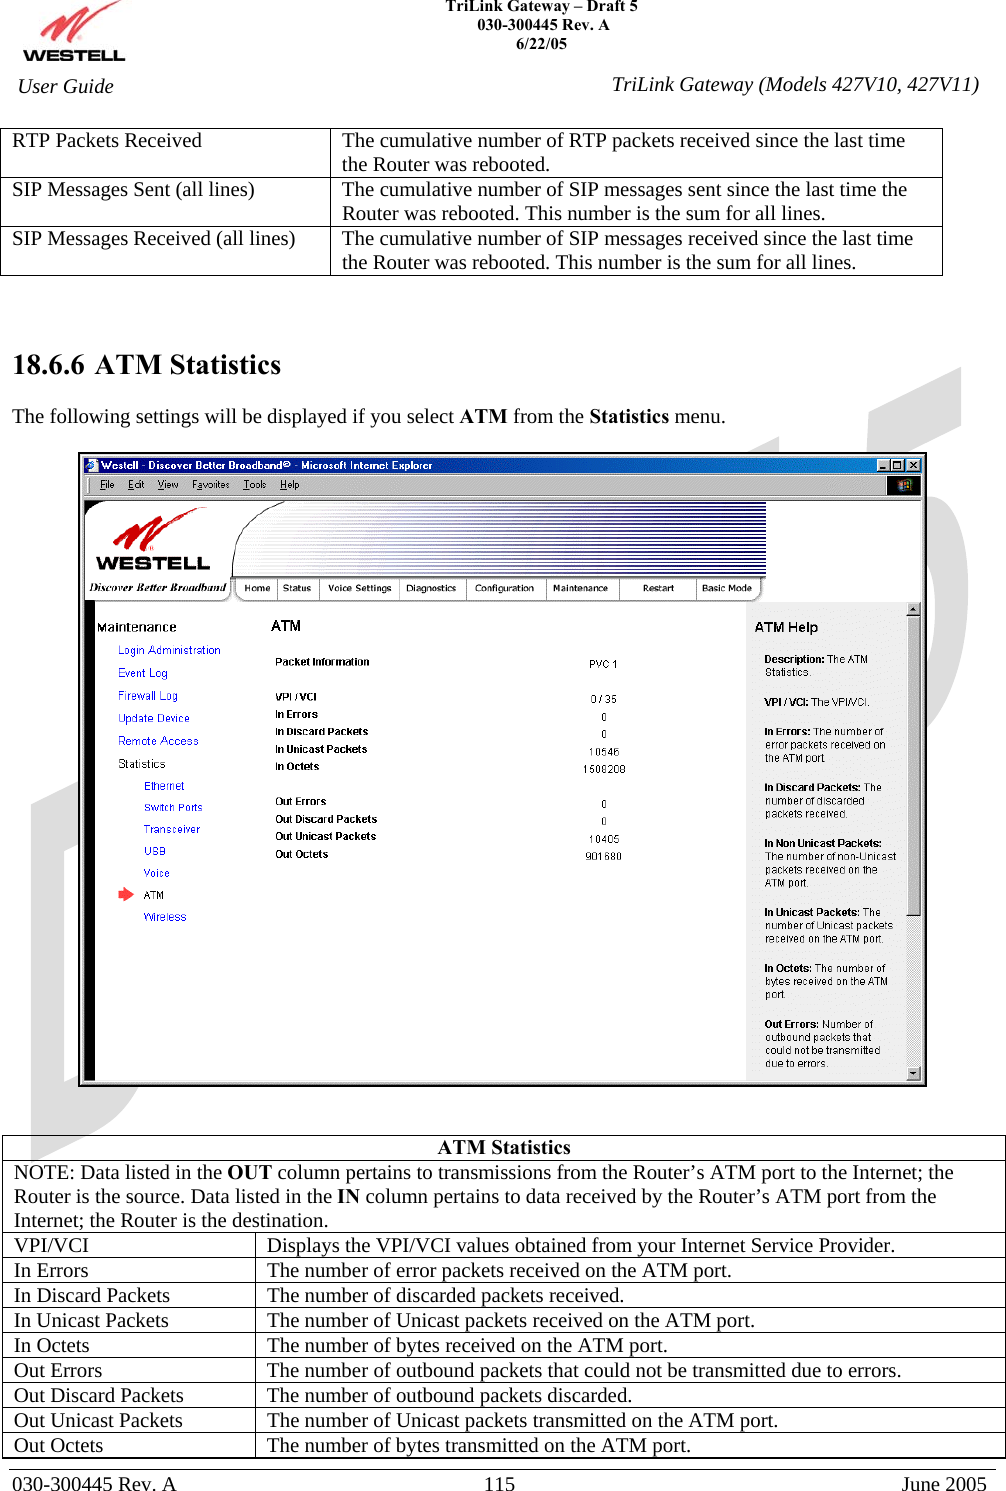    TriLink Gateway – Draft 5   030-300445 Rev. A 6/22/05   030-300445 Rev. A  115  June 2005  User Guide  TriLink Gateway (Models 427V10, 427V11)RTP Packets Received  The cumulative number of RTP packets received since the last time the Router was rebooted. SIP Messages Sent (all lines)  The cumulative number of SIP messages sent since the last time the Router was rebooted. This number is the sum for all lines. SIP Messages Received (all lines)  The cumulative number of SIP messages received since the last time the Router was rebooted. This number is the sum for all lines.    18.6.6  ATM Statistics  The following settings will be displayed if you select ATM from the Statistics menu.     ATM Statistics NOTE: Data listed in the OUT column pertains to transmissions from the Router’s ATM port to the Internet; the Router is the source. Data listed in the IN column pertains to data received by the Router’s ATM port from the Internet; the Router is the destination. VPI/VCI  Displays the VPI/VCI values obtained from your Internet Service Provider. In Errors  The number of error packets received on the ATM port. In Discard Packets  The number of discarded packets received. In Unicast Packets  The number of Unicast packets received on the ATM port. In Octets  The number of bytes received on the ATM port. Out Errors  The number of outbound packets that could not be transmitted due to errors. Out Discard Packets  The number of outbound packets discarded. Out Unicast Packets  The number of Unicast packets transmitted on the ATM port. Out Octets  The number of bytes transmitted on the ATM port. 